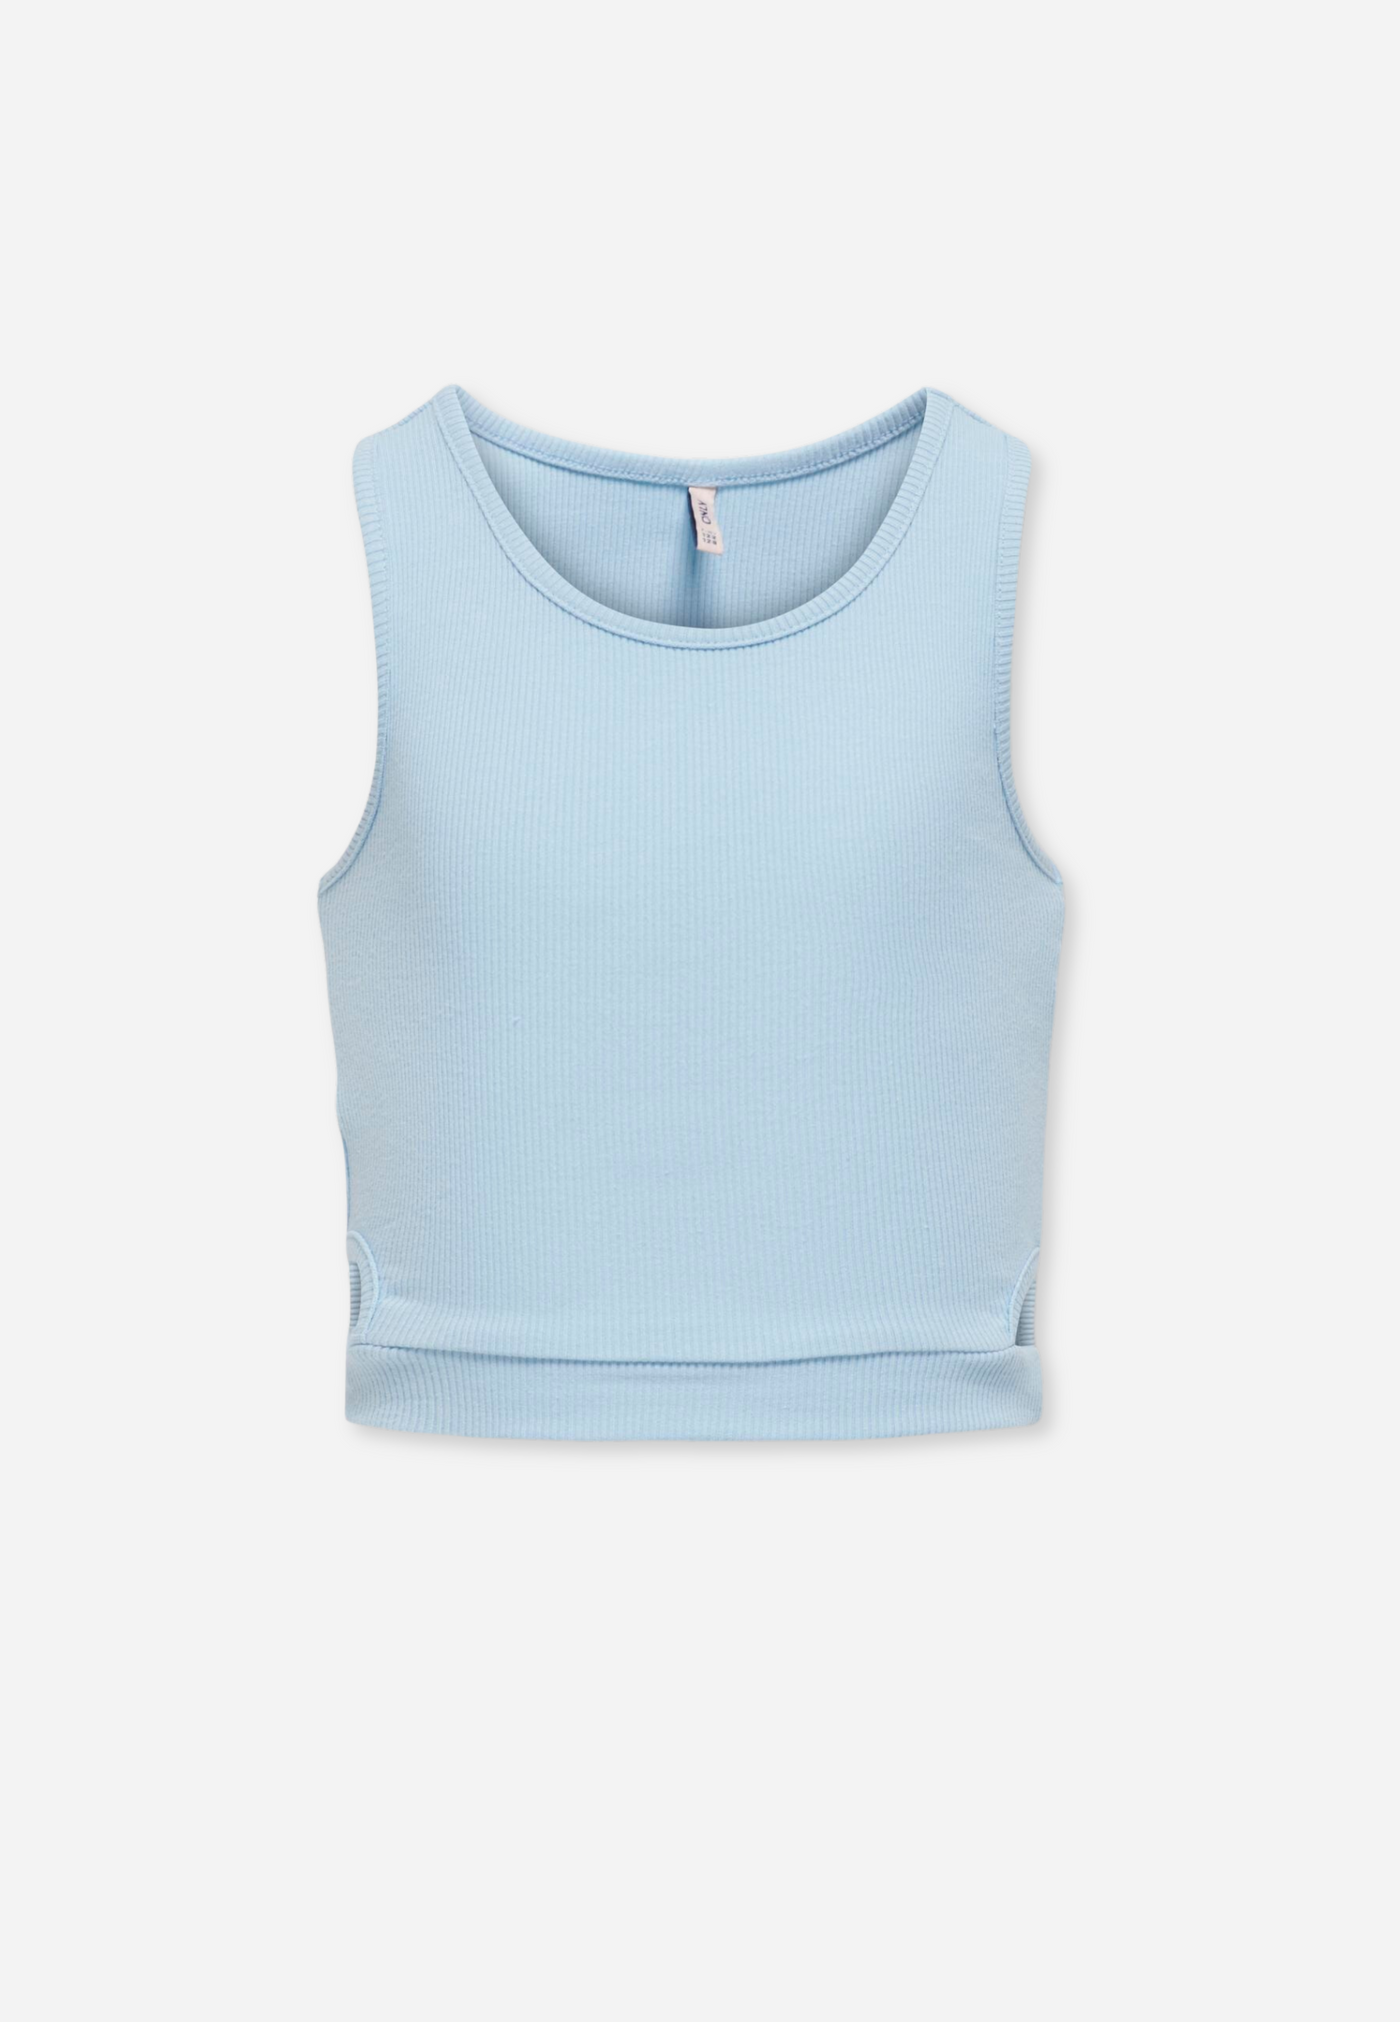 KOGNESSA S/S OUT TOP - CLEAR SKY